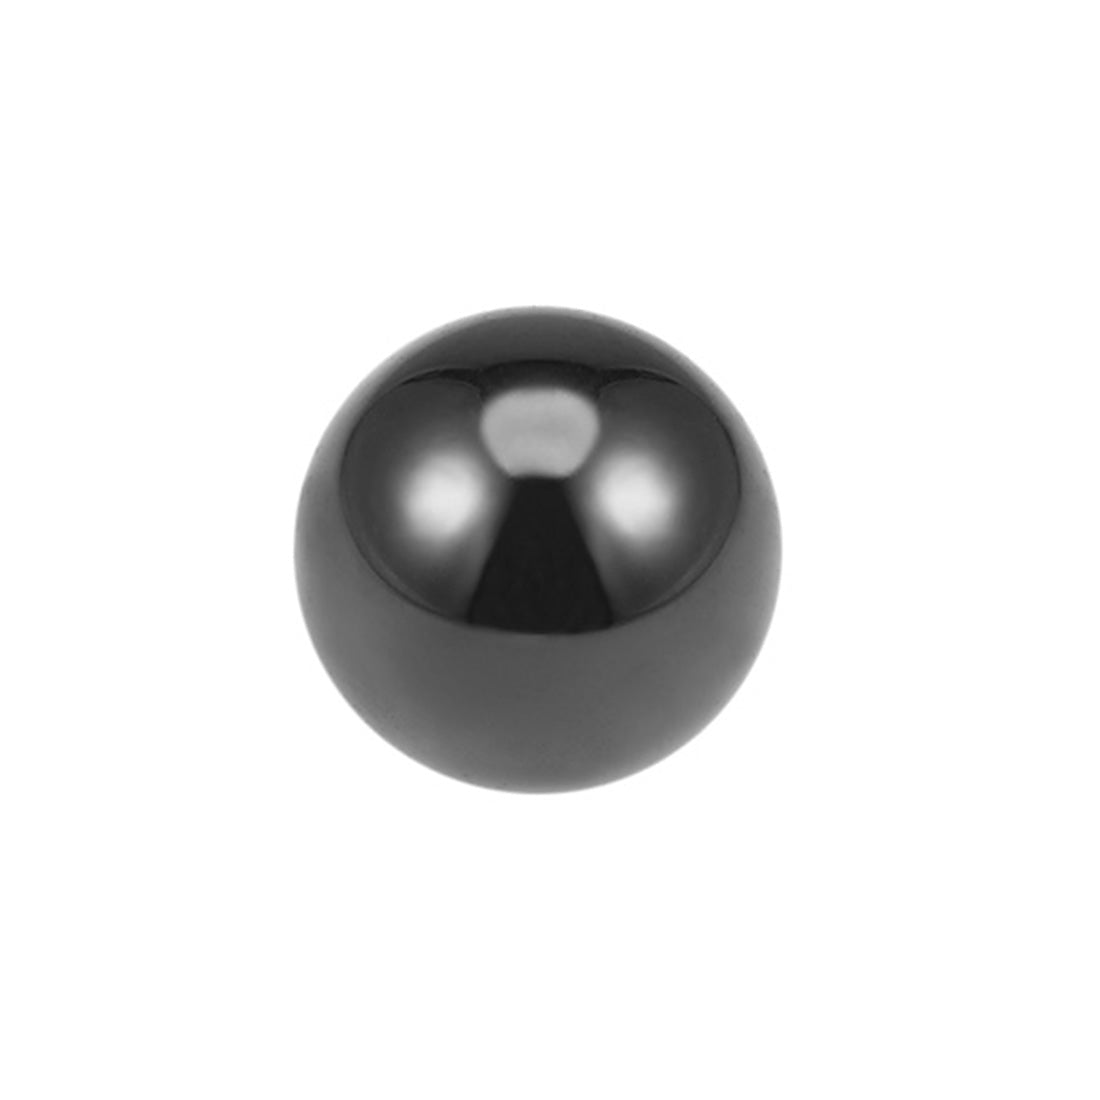 uxcell Uxcell Bearing Balls Inch Silicon Nitride G5 Precision Balls